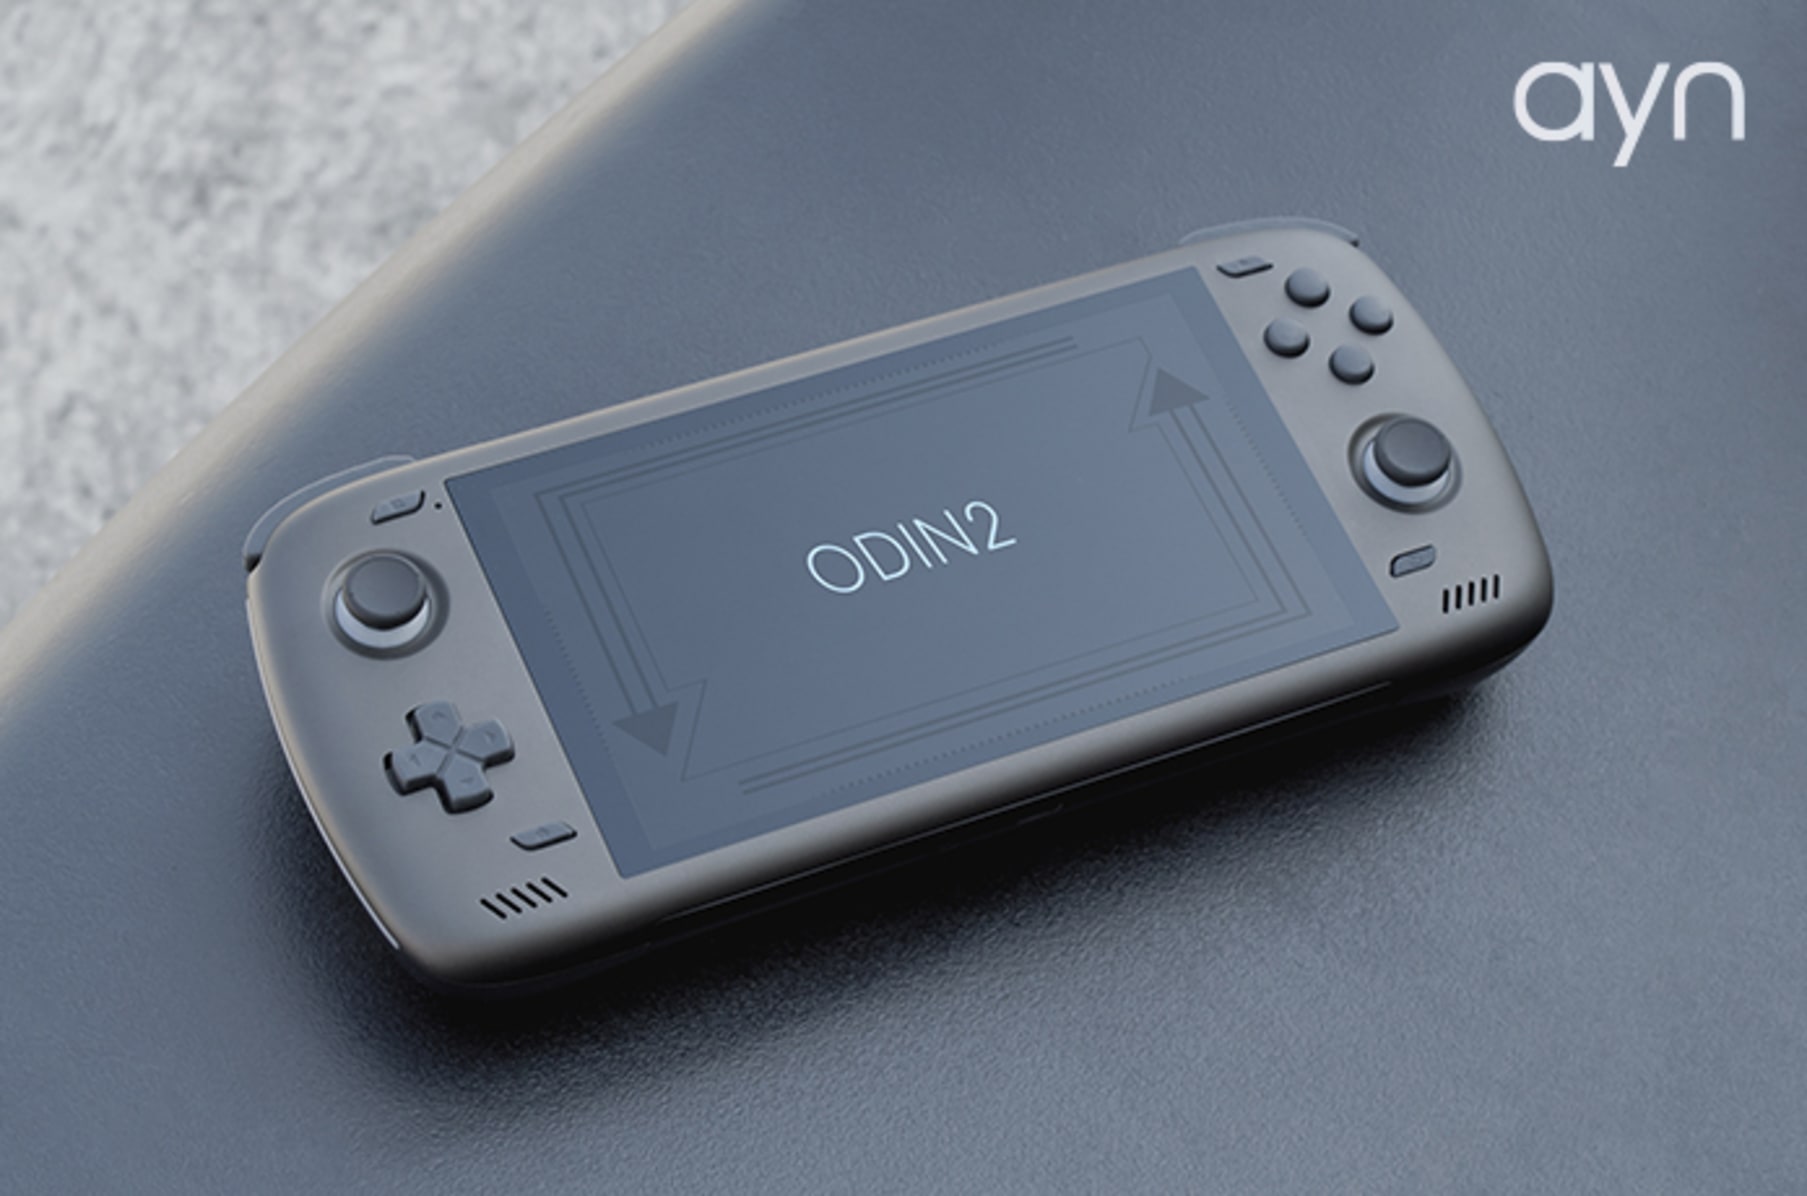 The AYN Odin 2 Approaches - Retro Handhelds